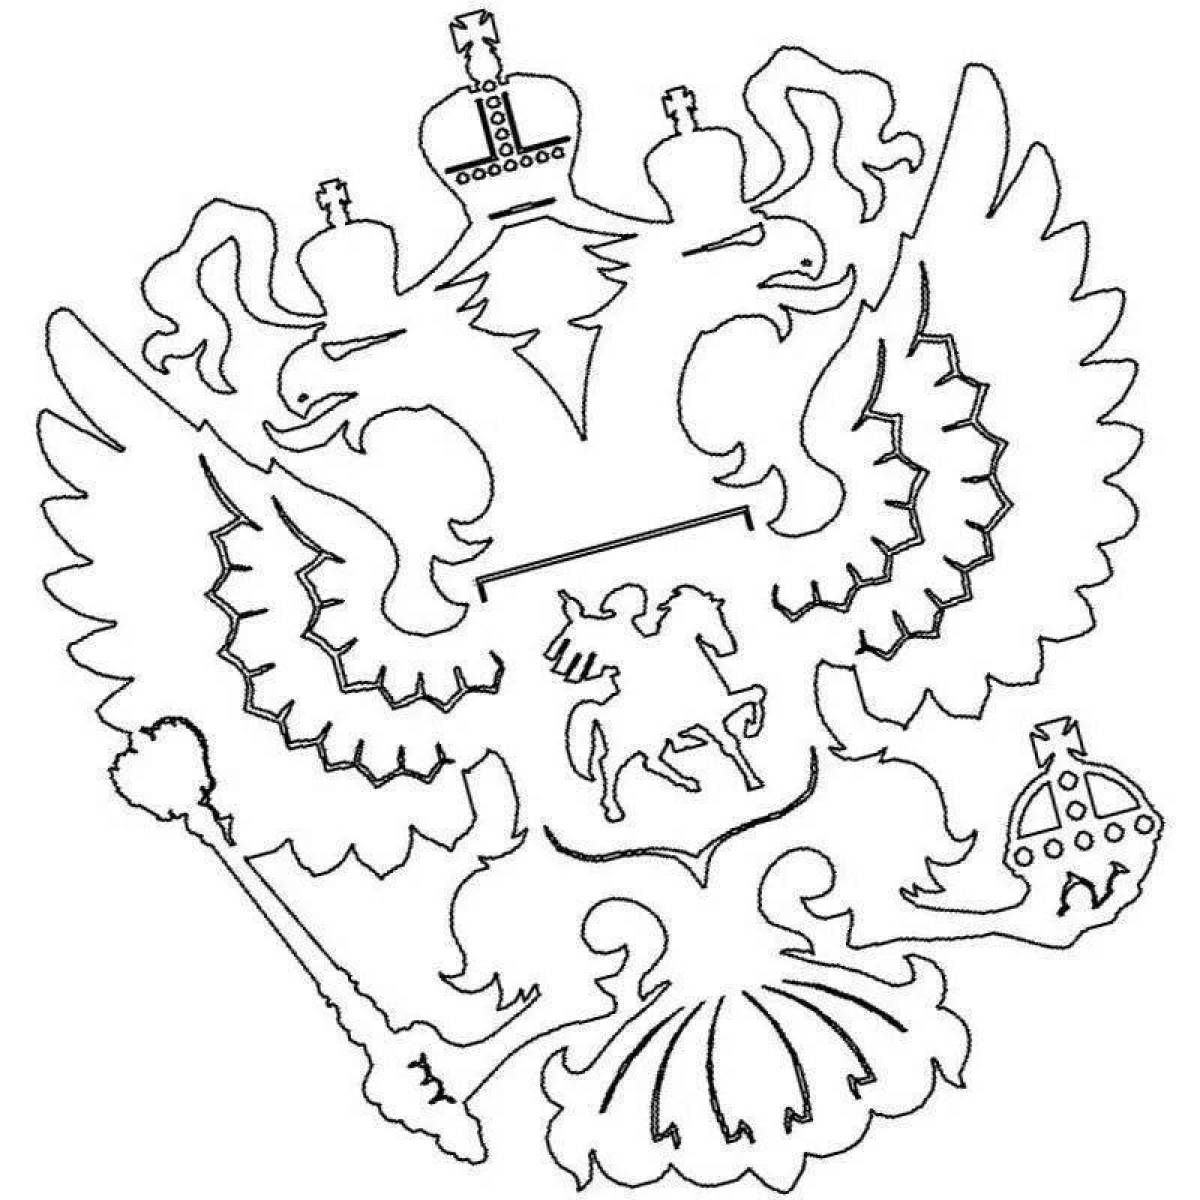 Coloring page with striking Russian symbol